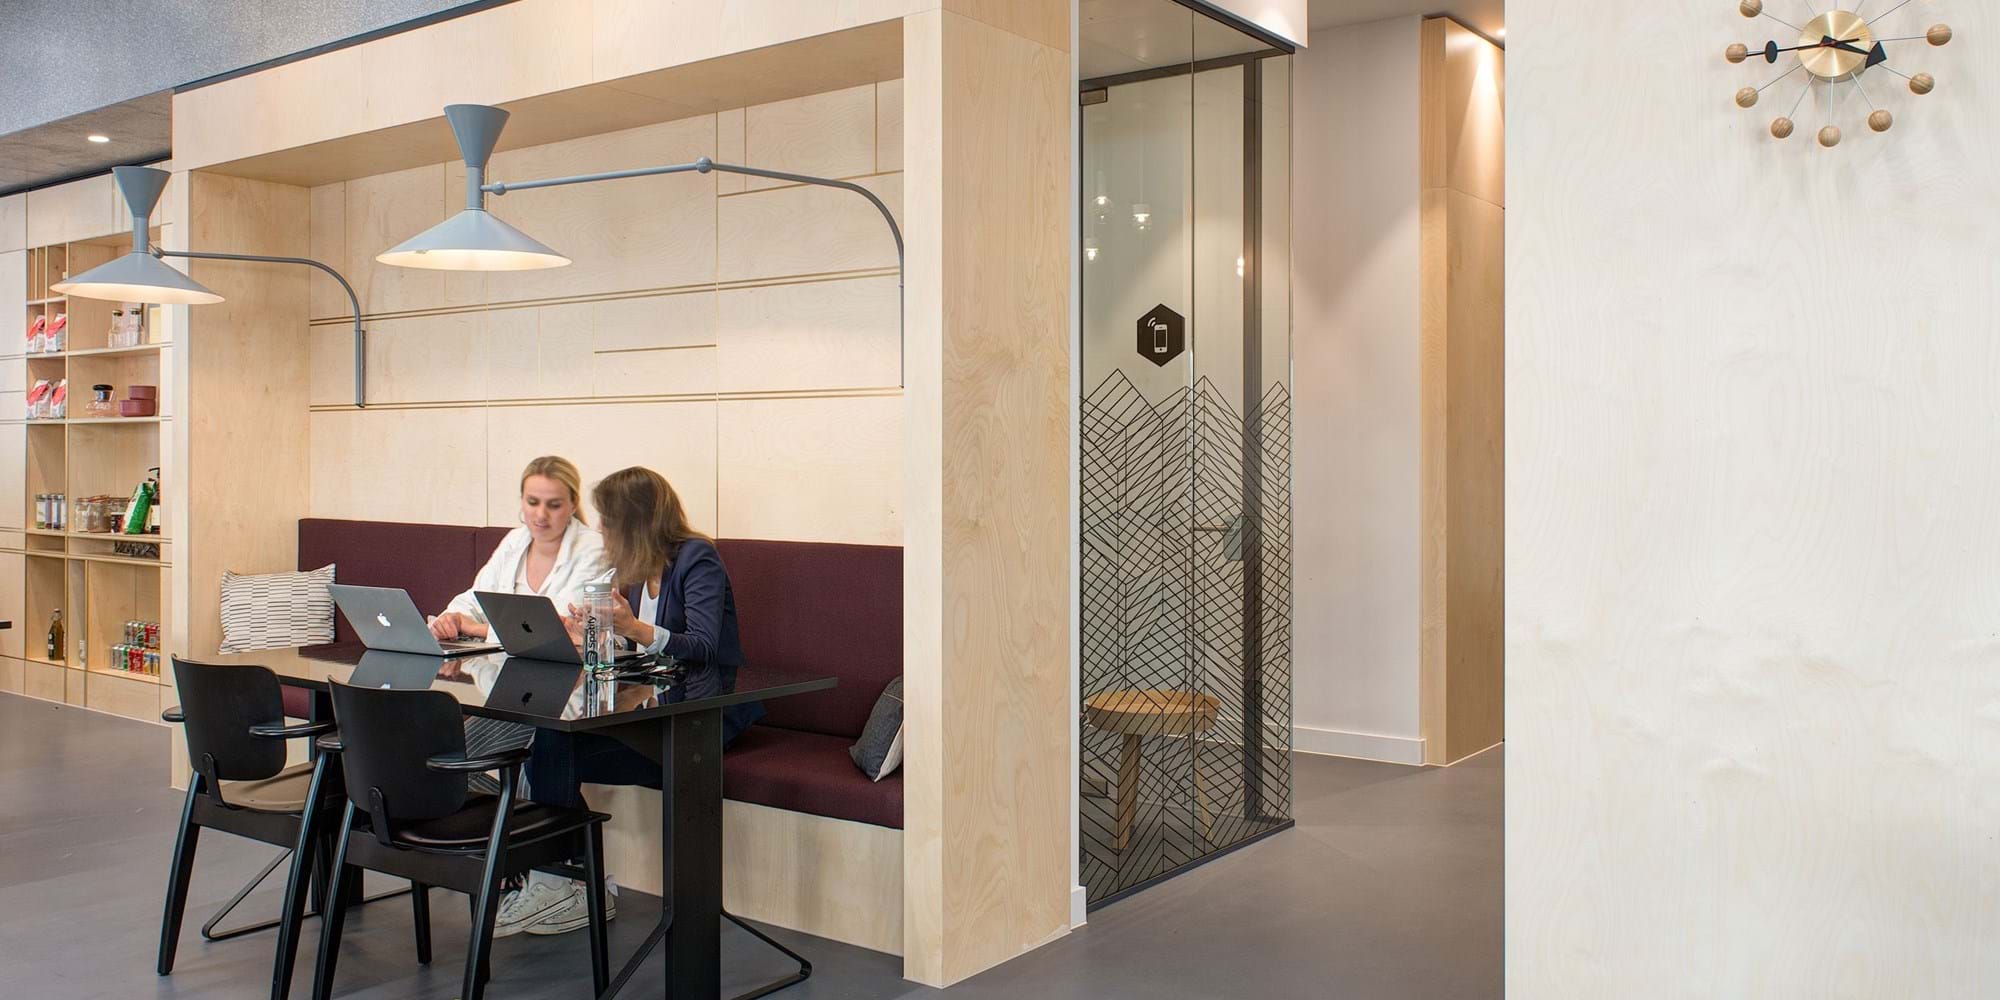 Modus Workspace office design, fit out and refurbishment - Spaces - Harley Building - Spaces Fitzrovia 41 highres sRGB.jpg